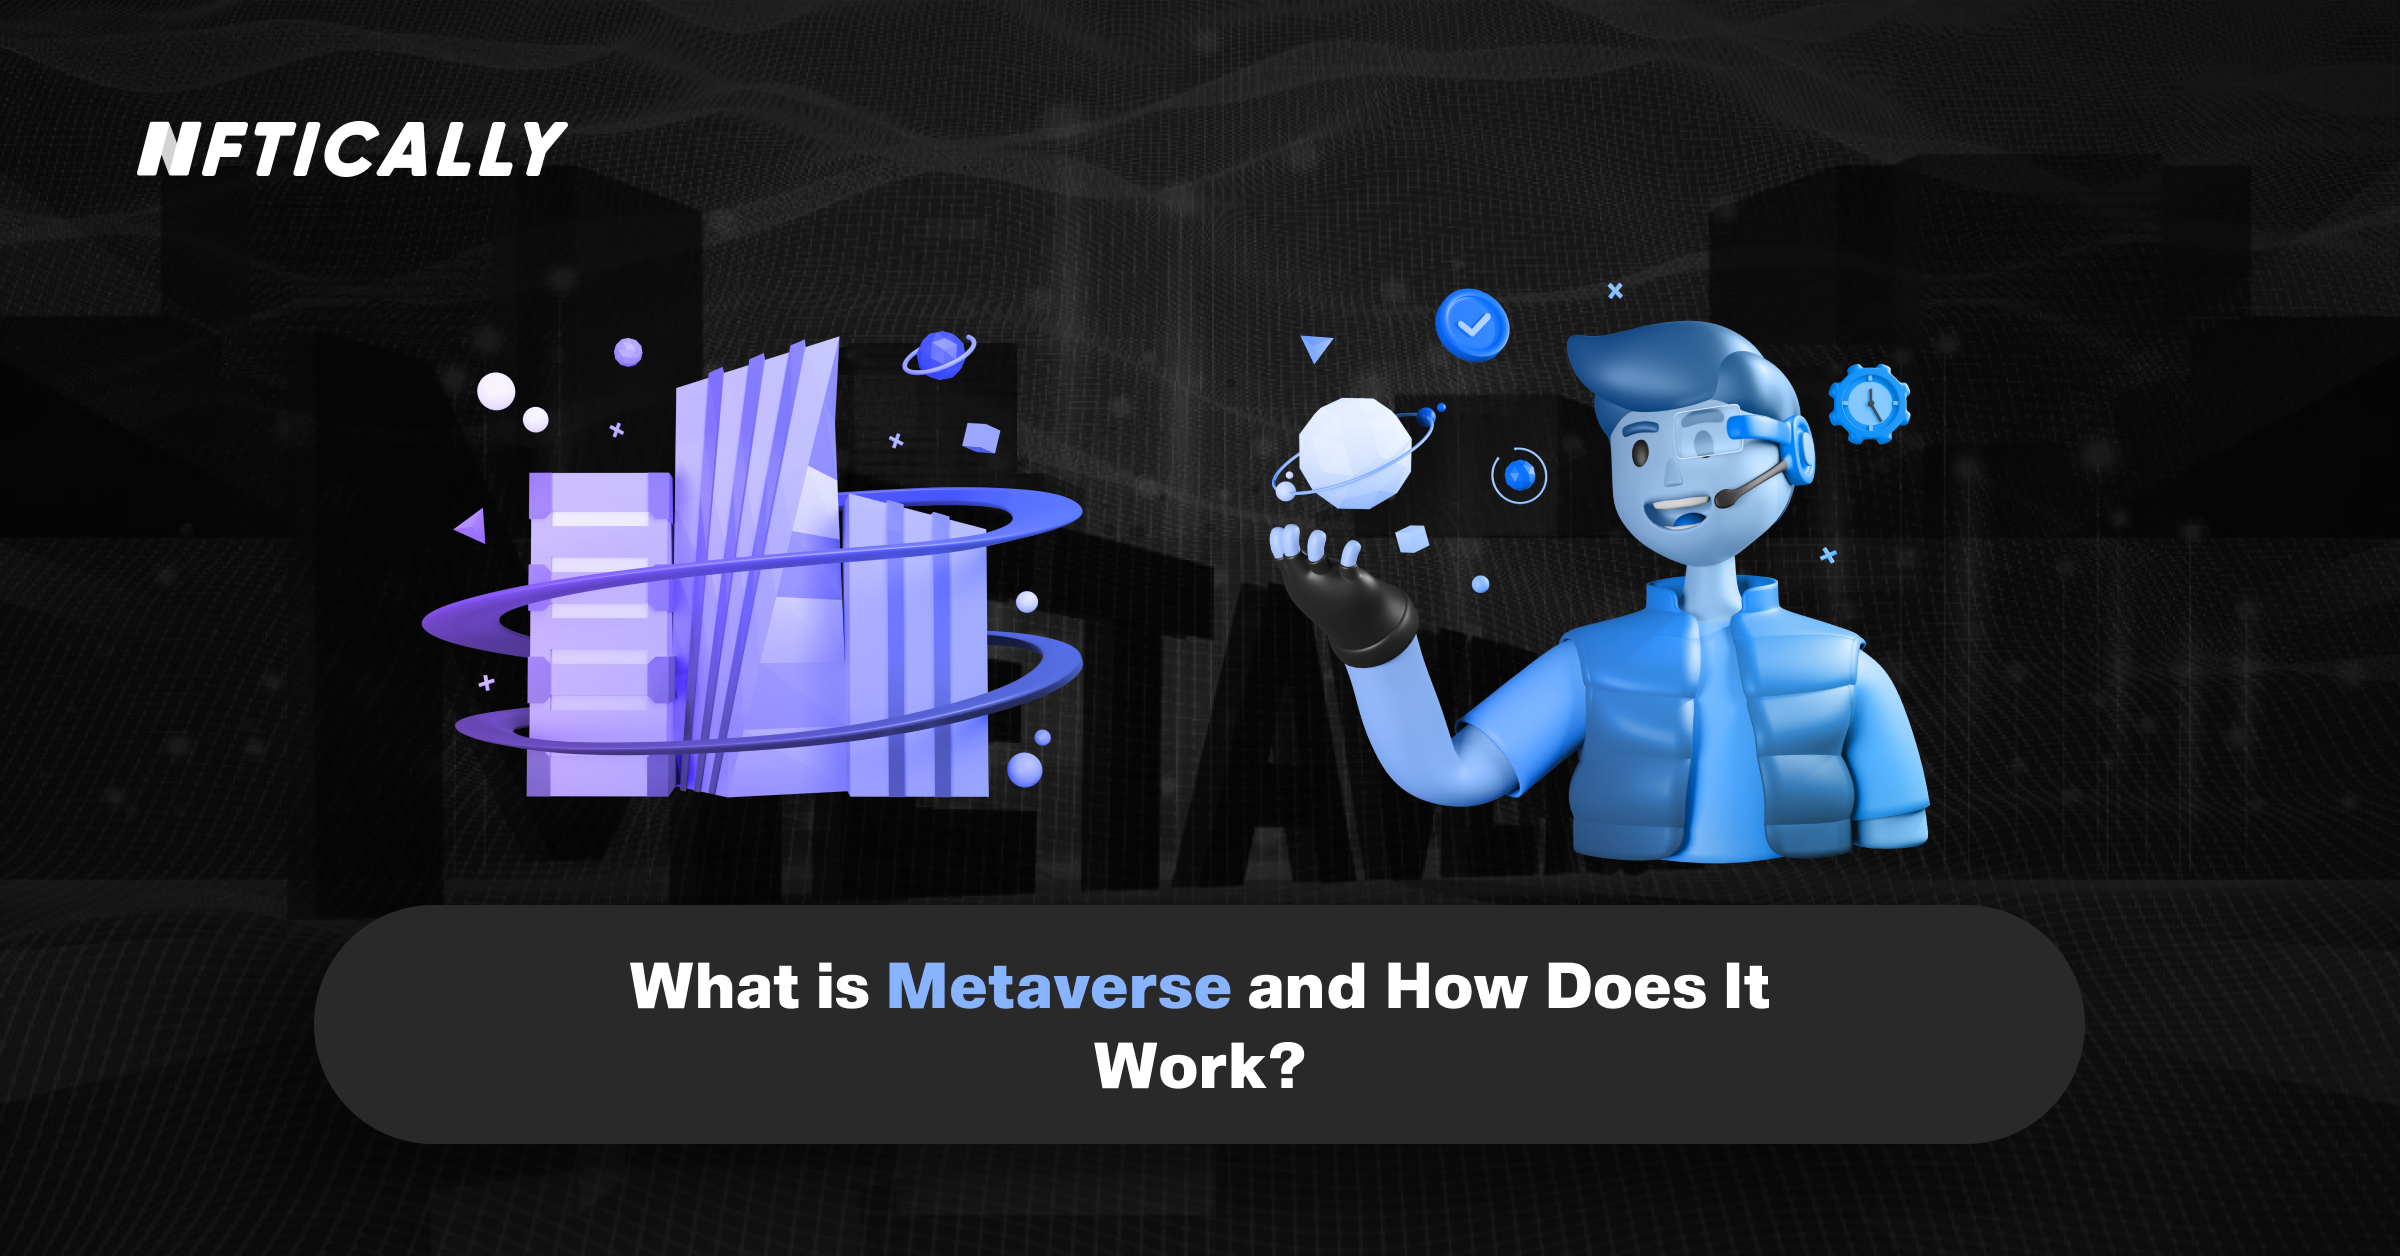 What is Metaverse and How Does It Work?